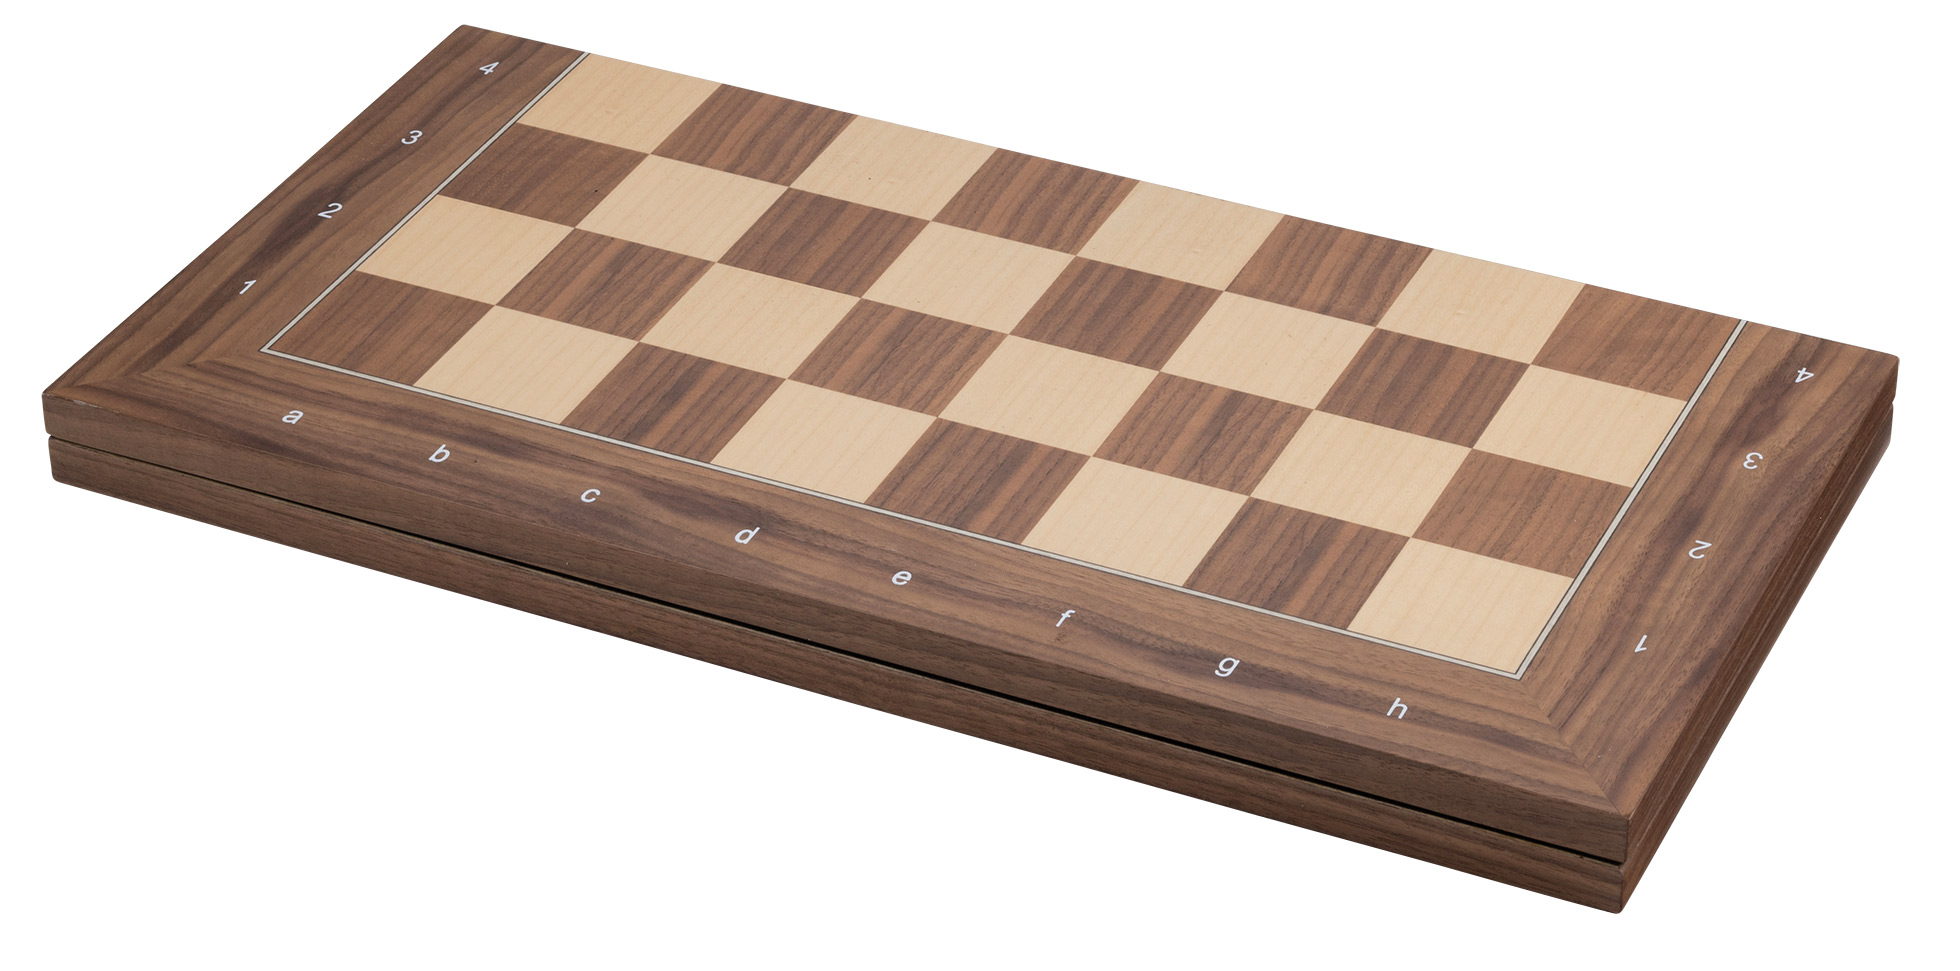 Chessboard Kopenhagen, field 50 mm, foldable, with numbers and letters